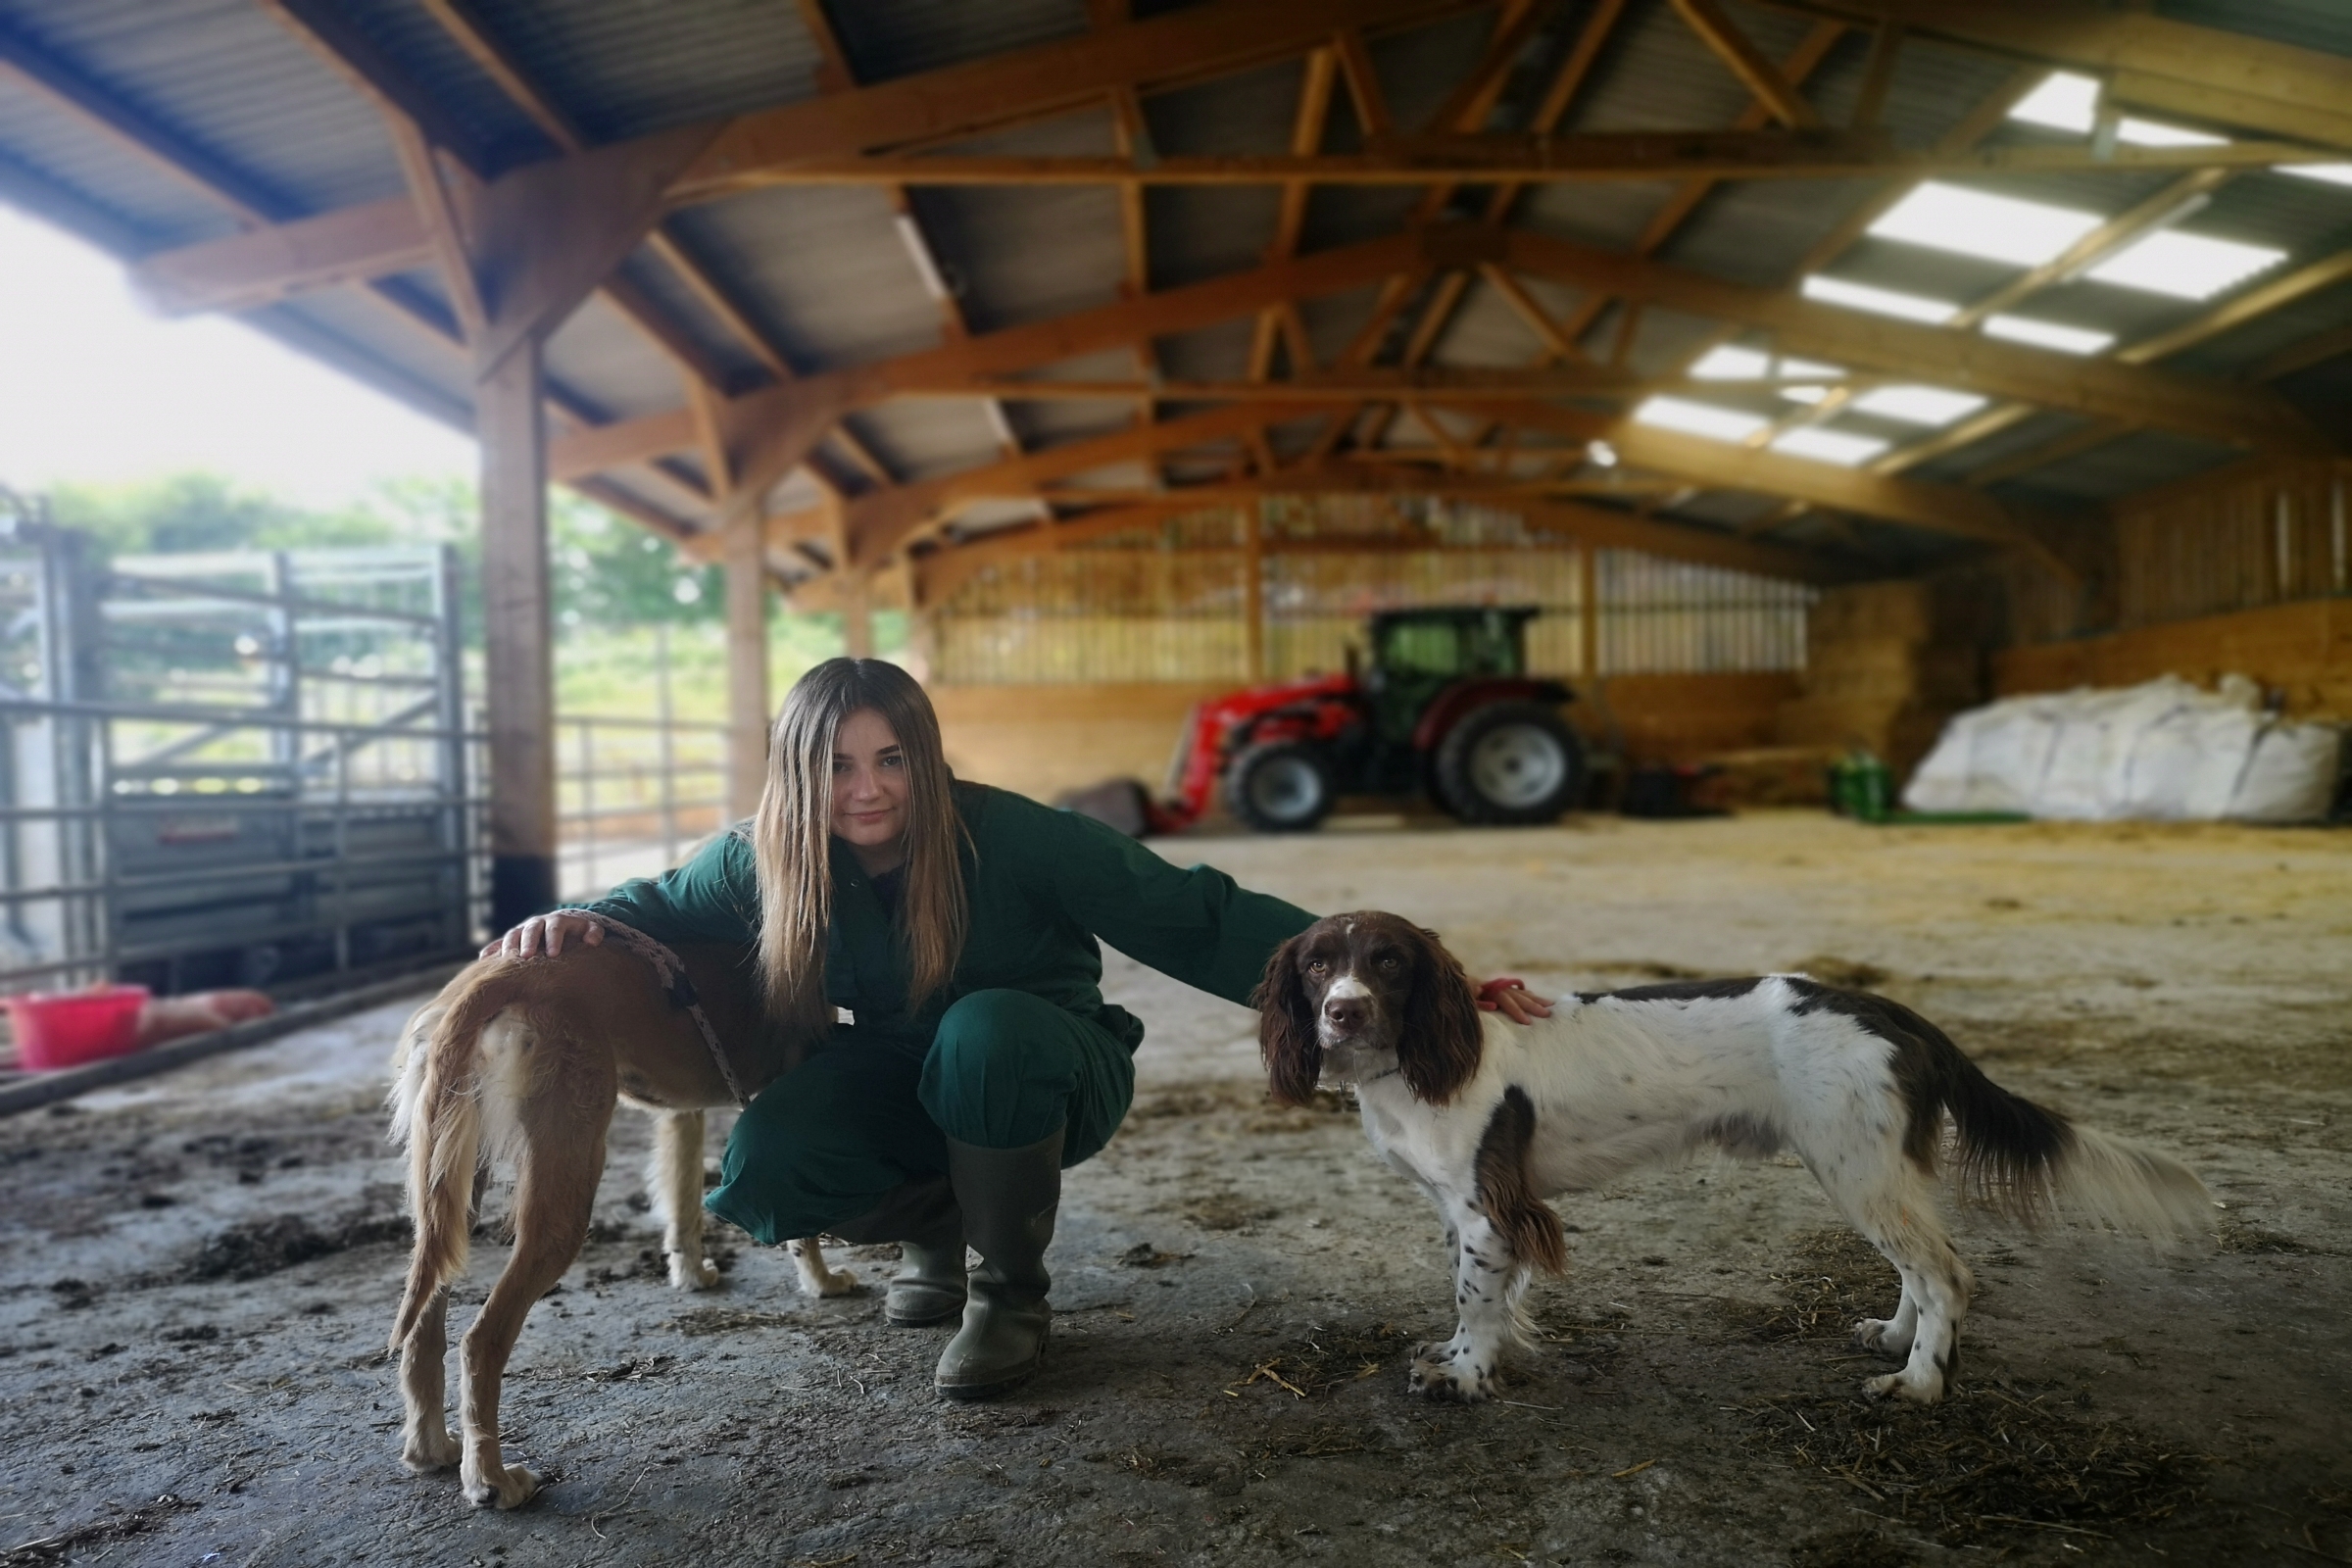 Girl holding two dogs in barn